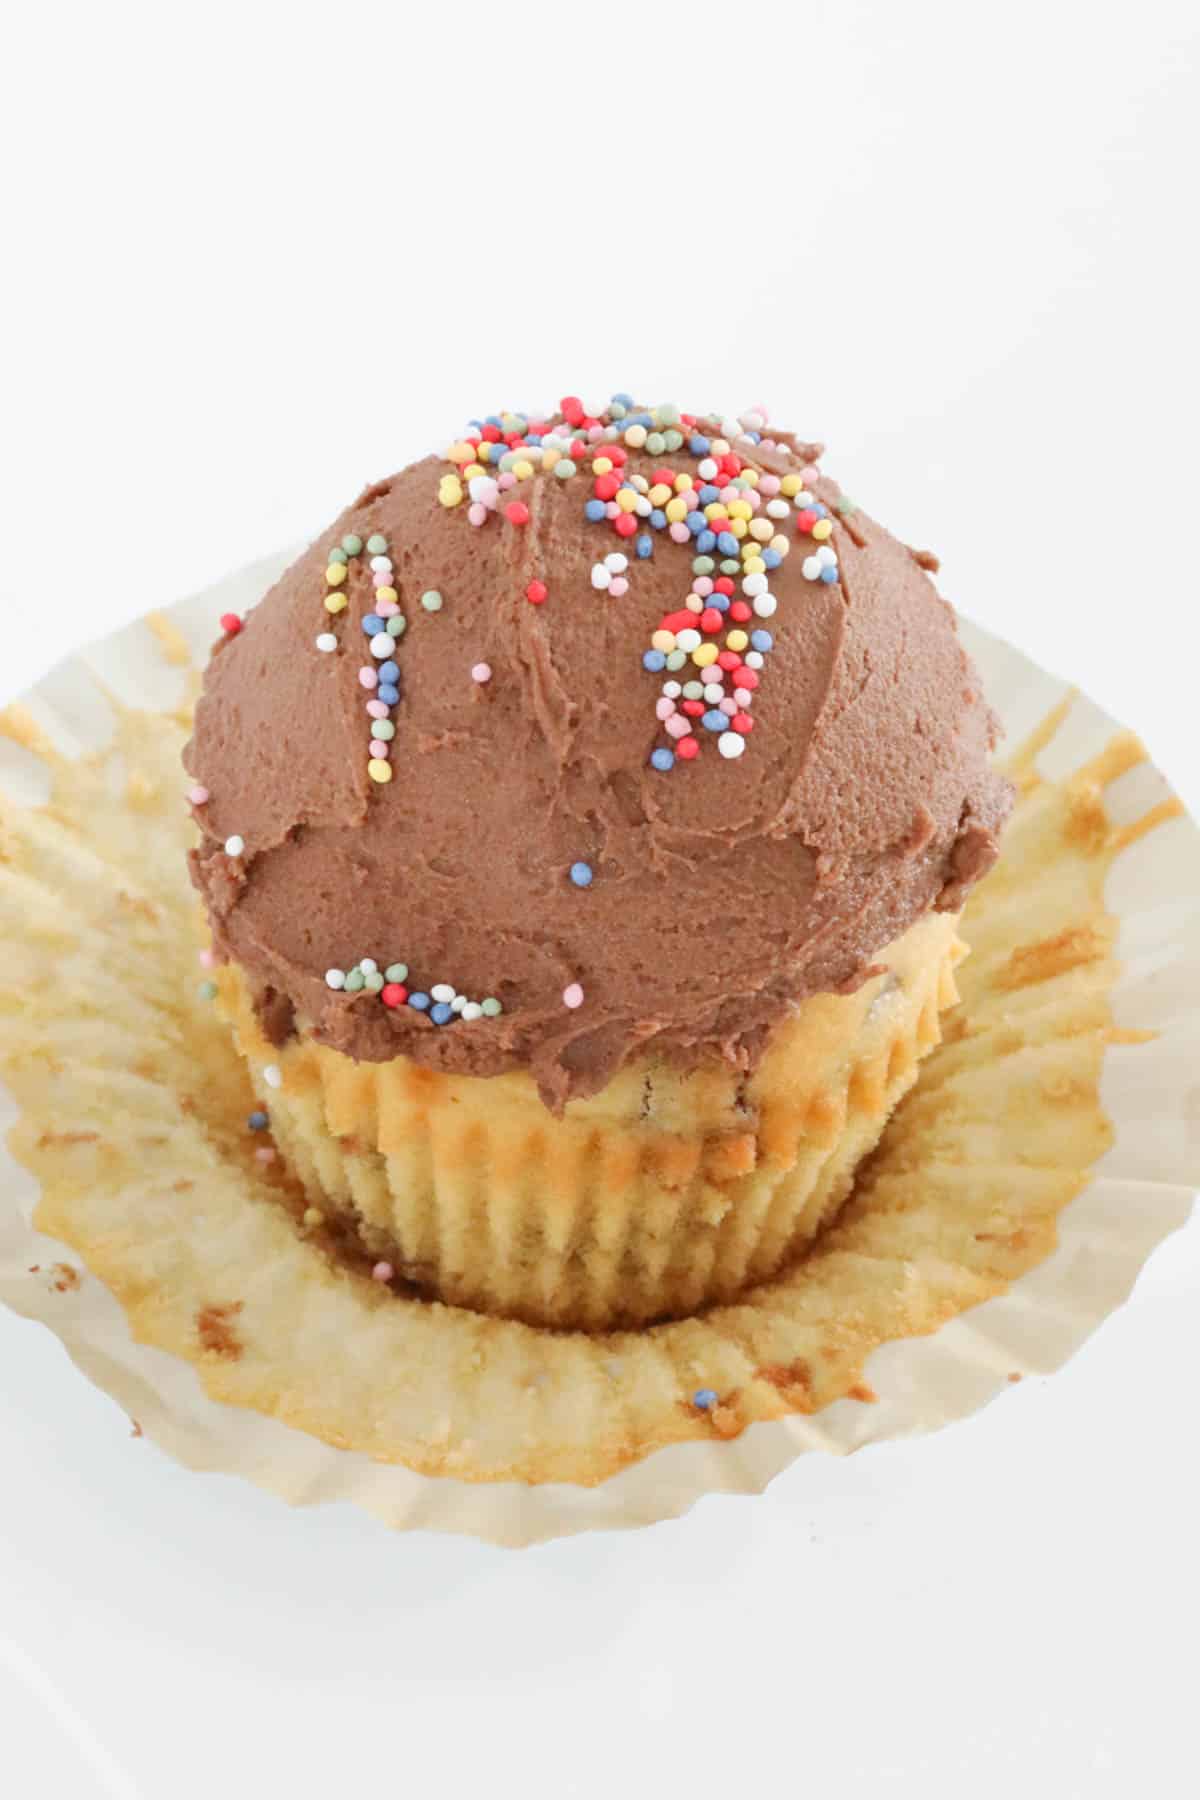 A cupcake coated in chocolate frosting.